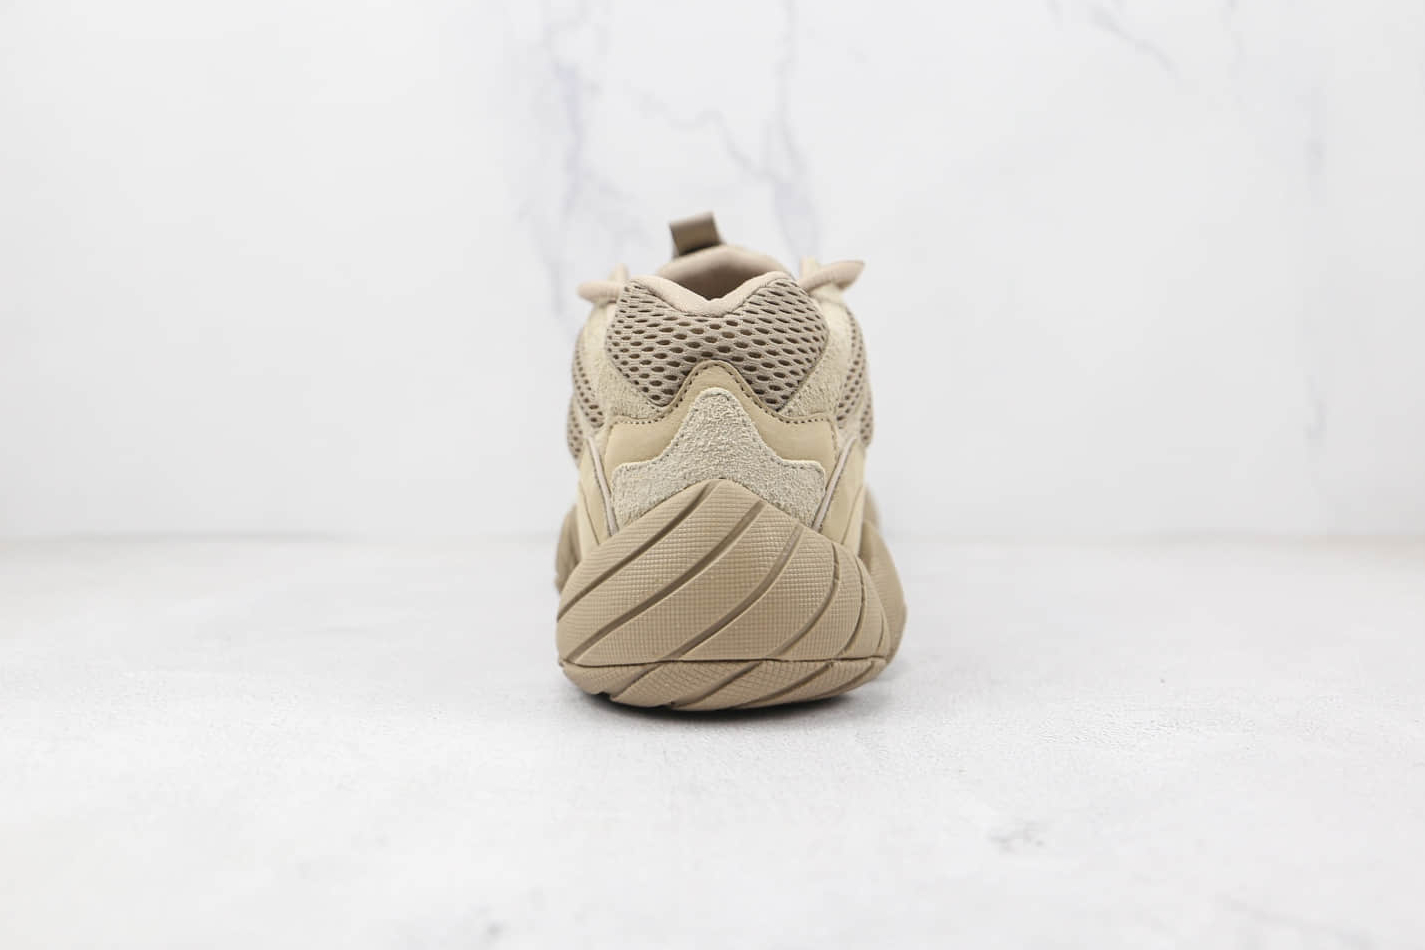 Adidas Yeezy 500 'Taupe Light' GX3605 - The Perfect Blend of Style and Comfort